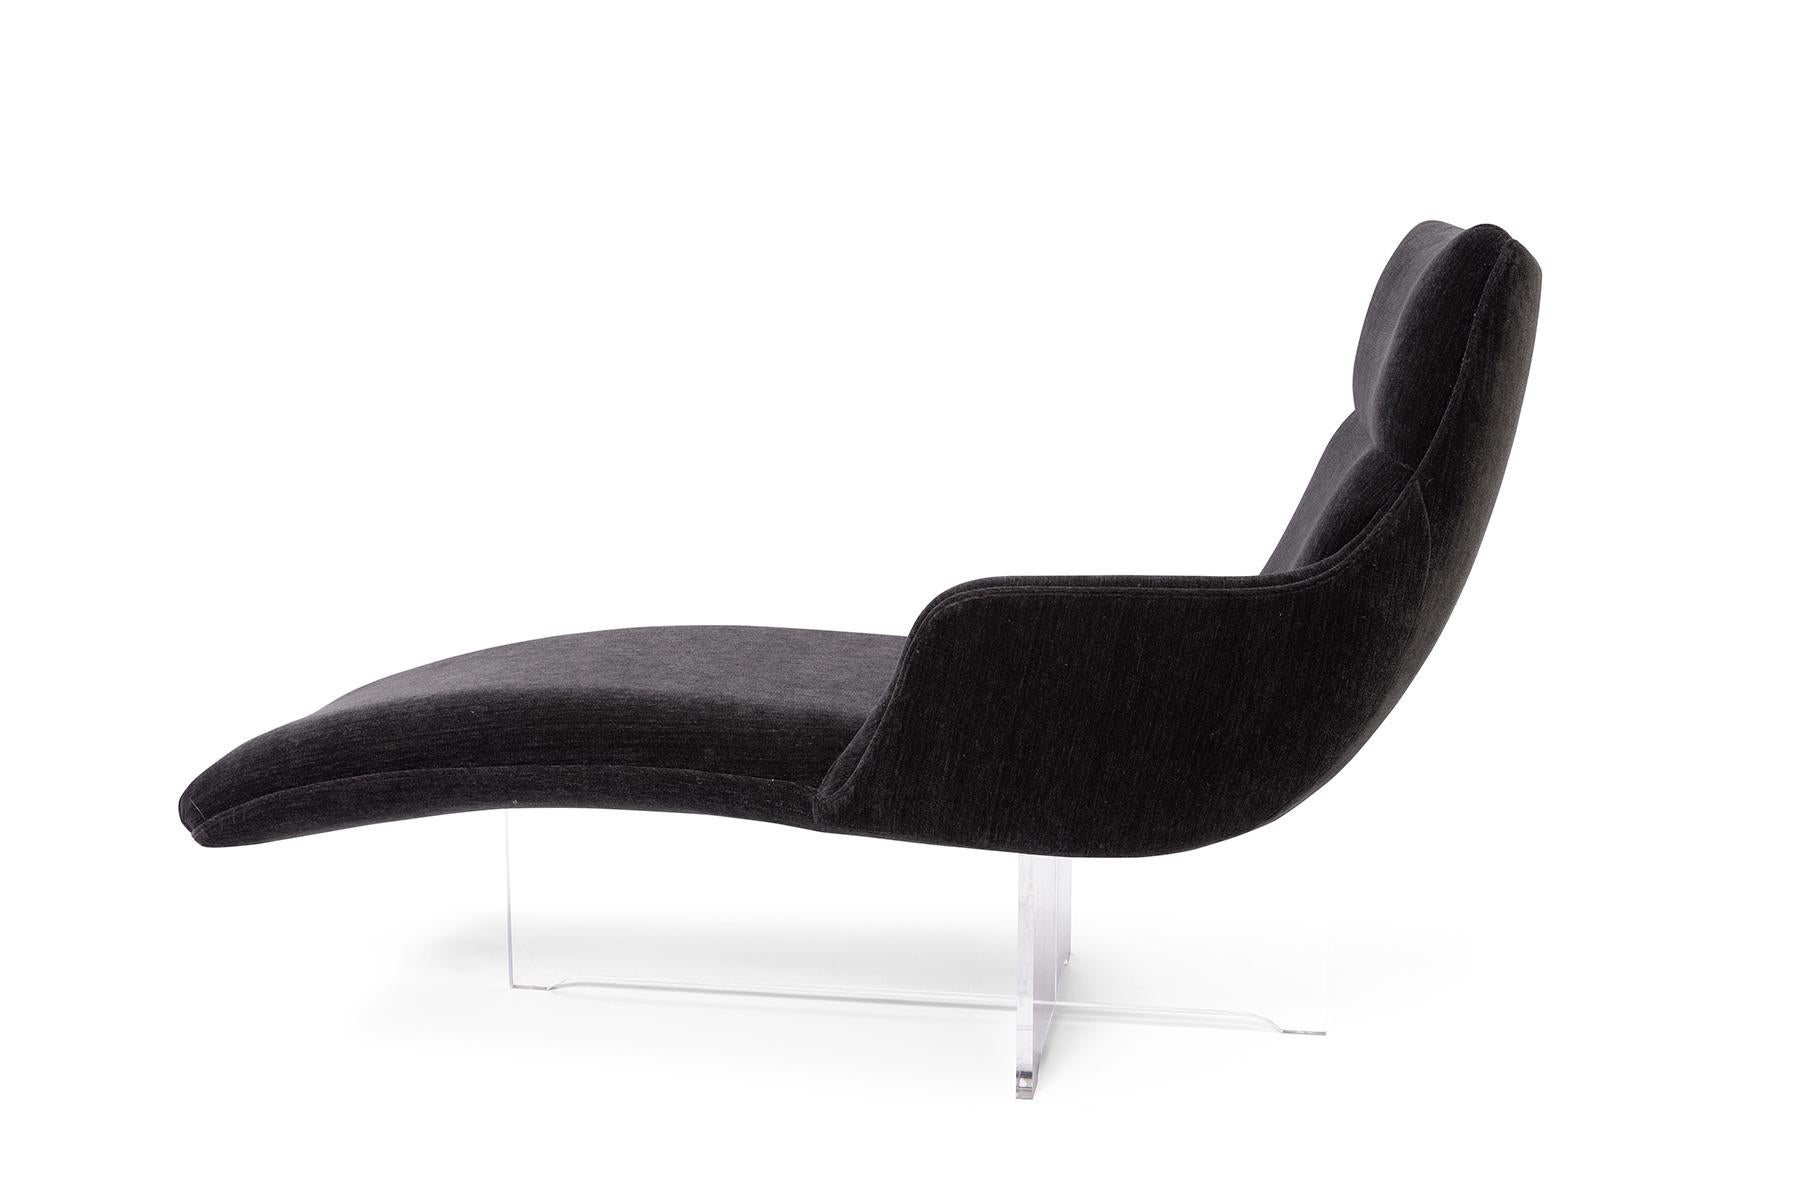 American Erica Chaise by Vladimir Kagan in Charcoal Gray Chenille